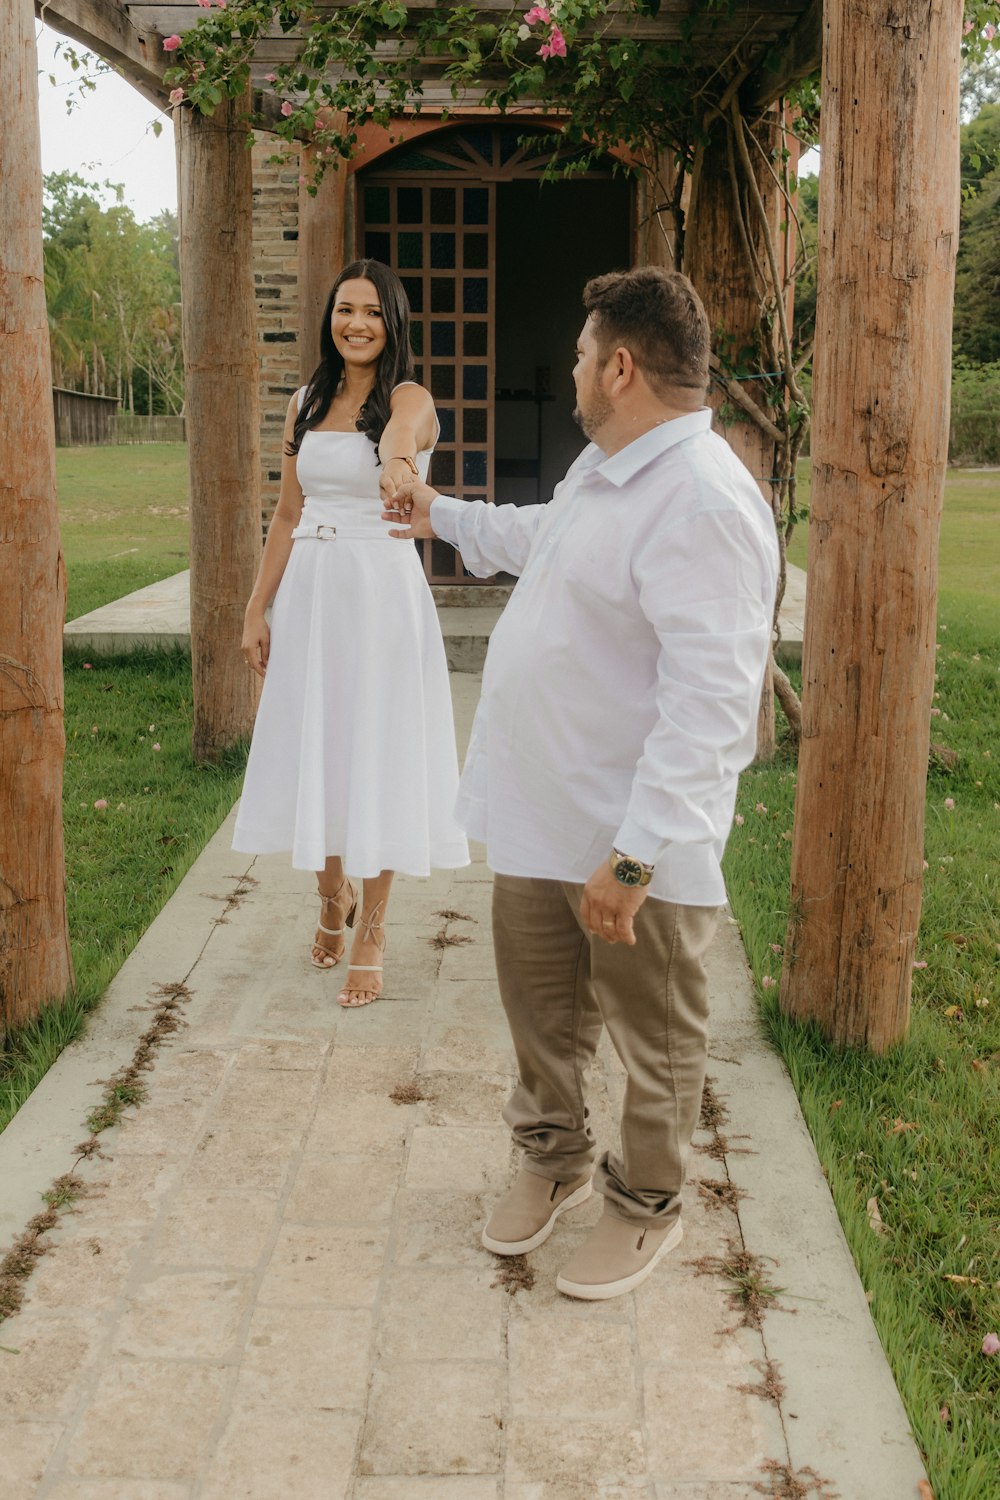 a woman in a white dress standing next to a man in a white dress